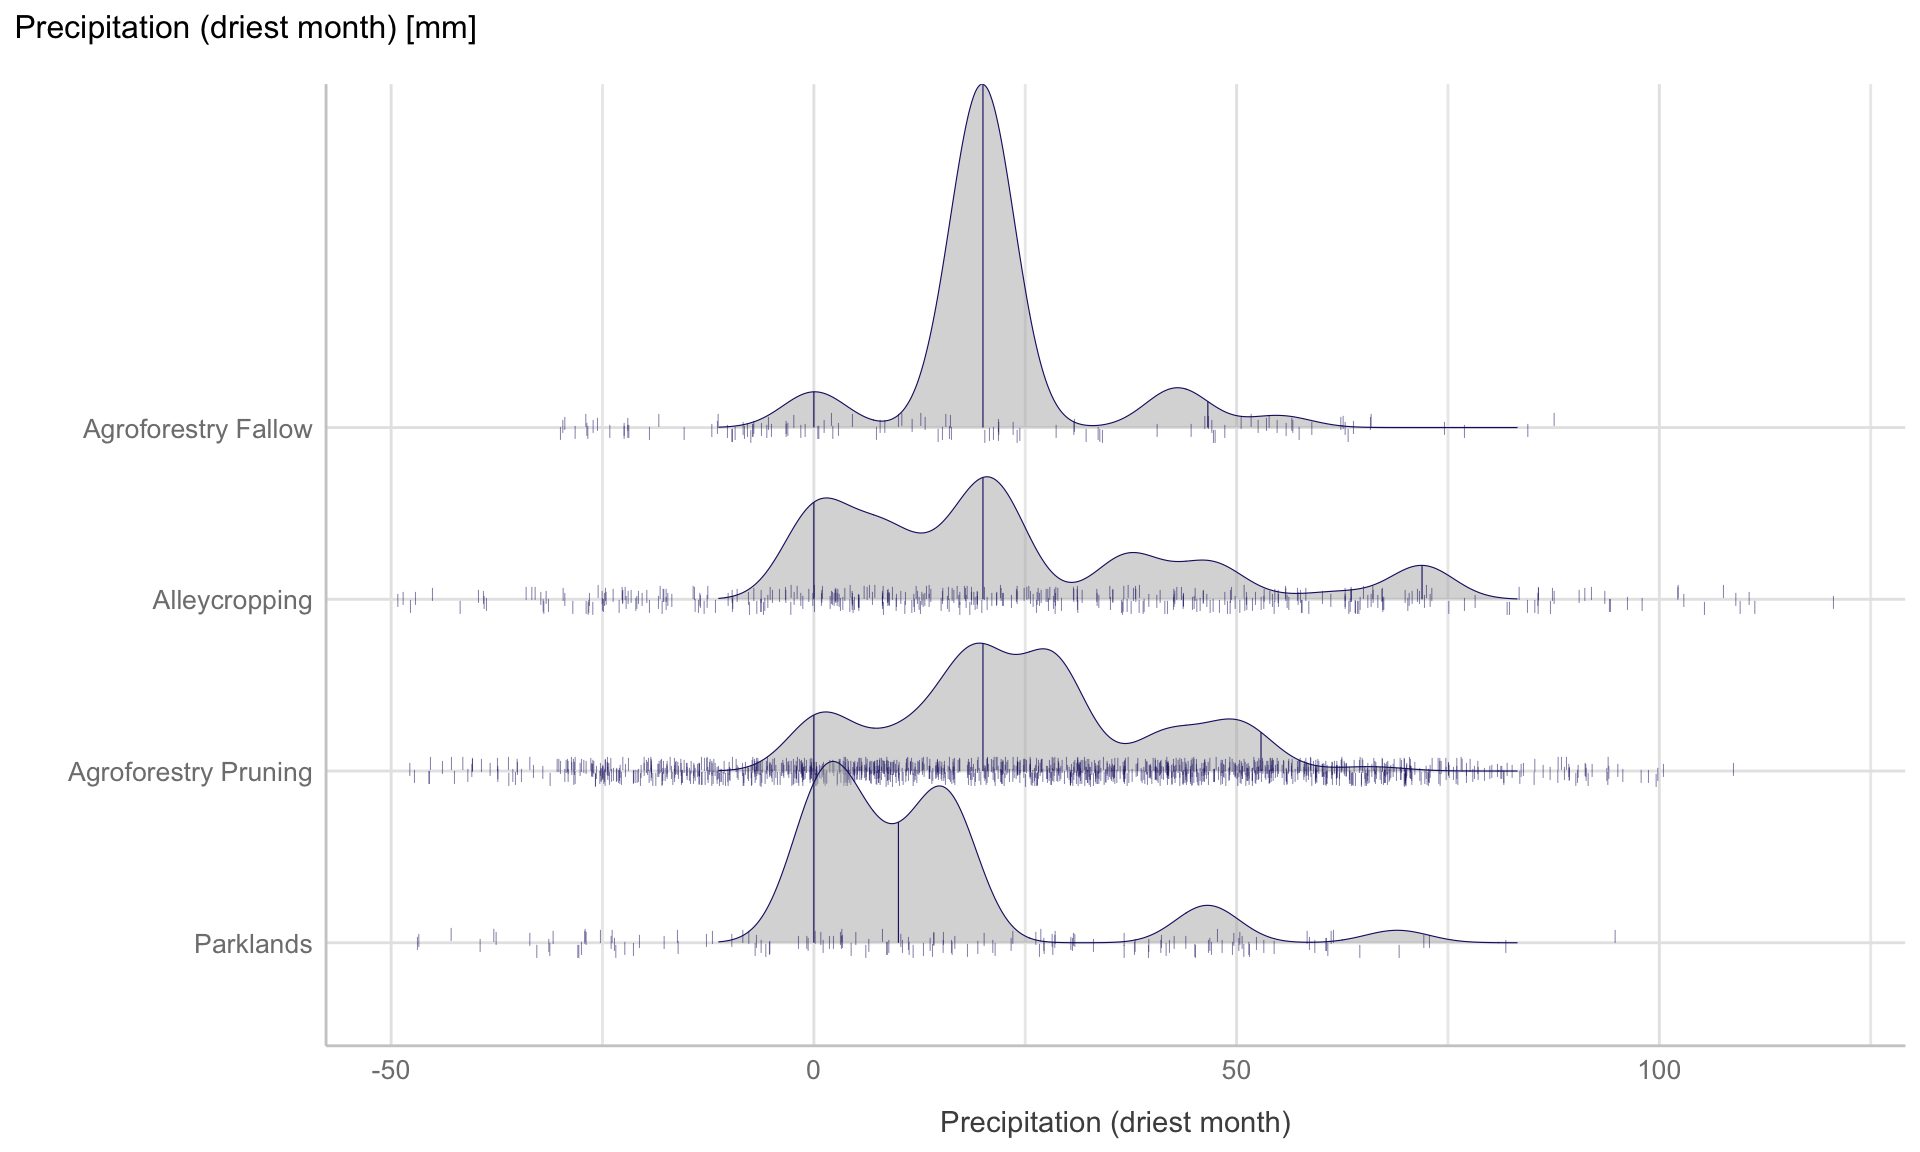 Ridge line plot: Distribution of precipitation of driest month for the four different agroforestry practices